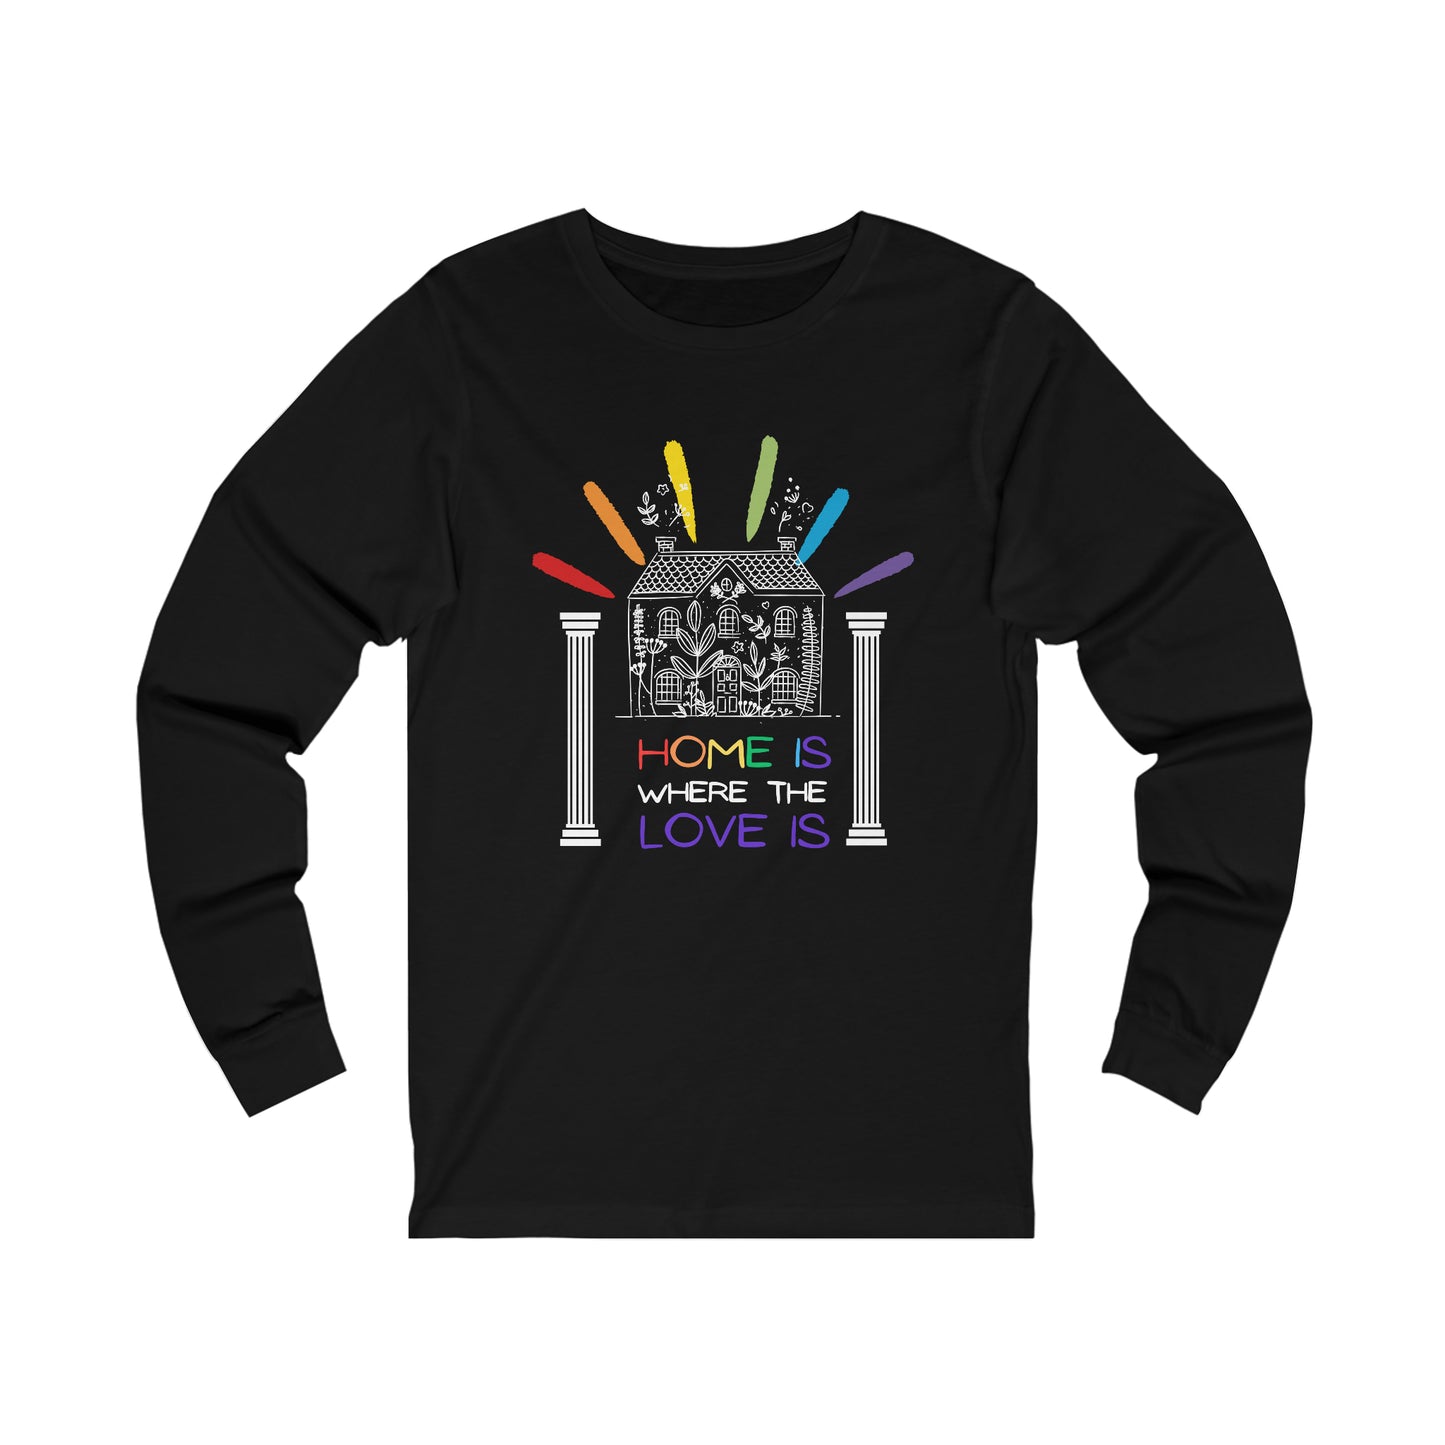 Home Is Where The Love Is Unisex Jersey Long Sleeve Tee